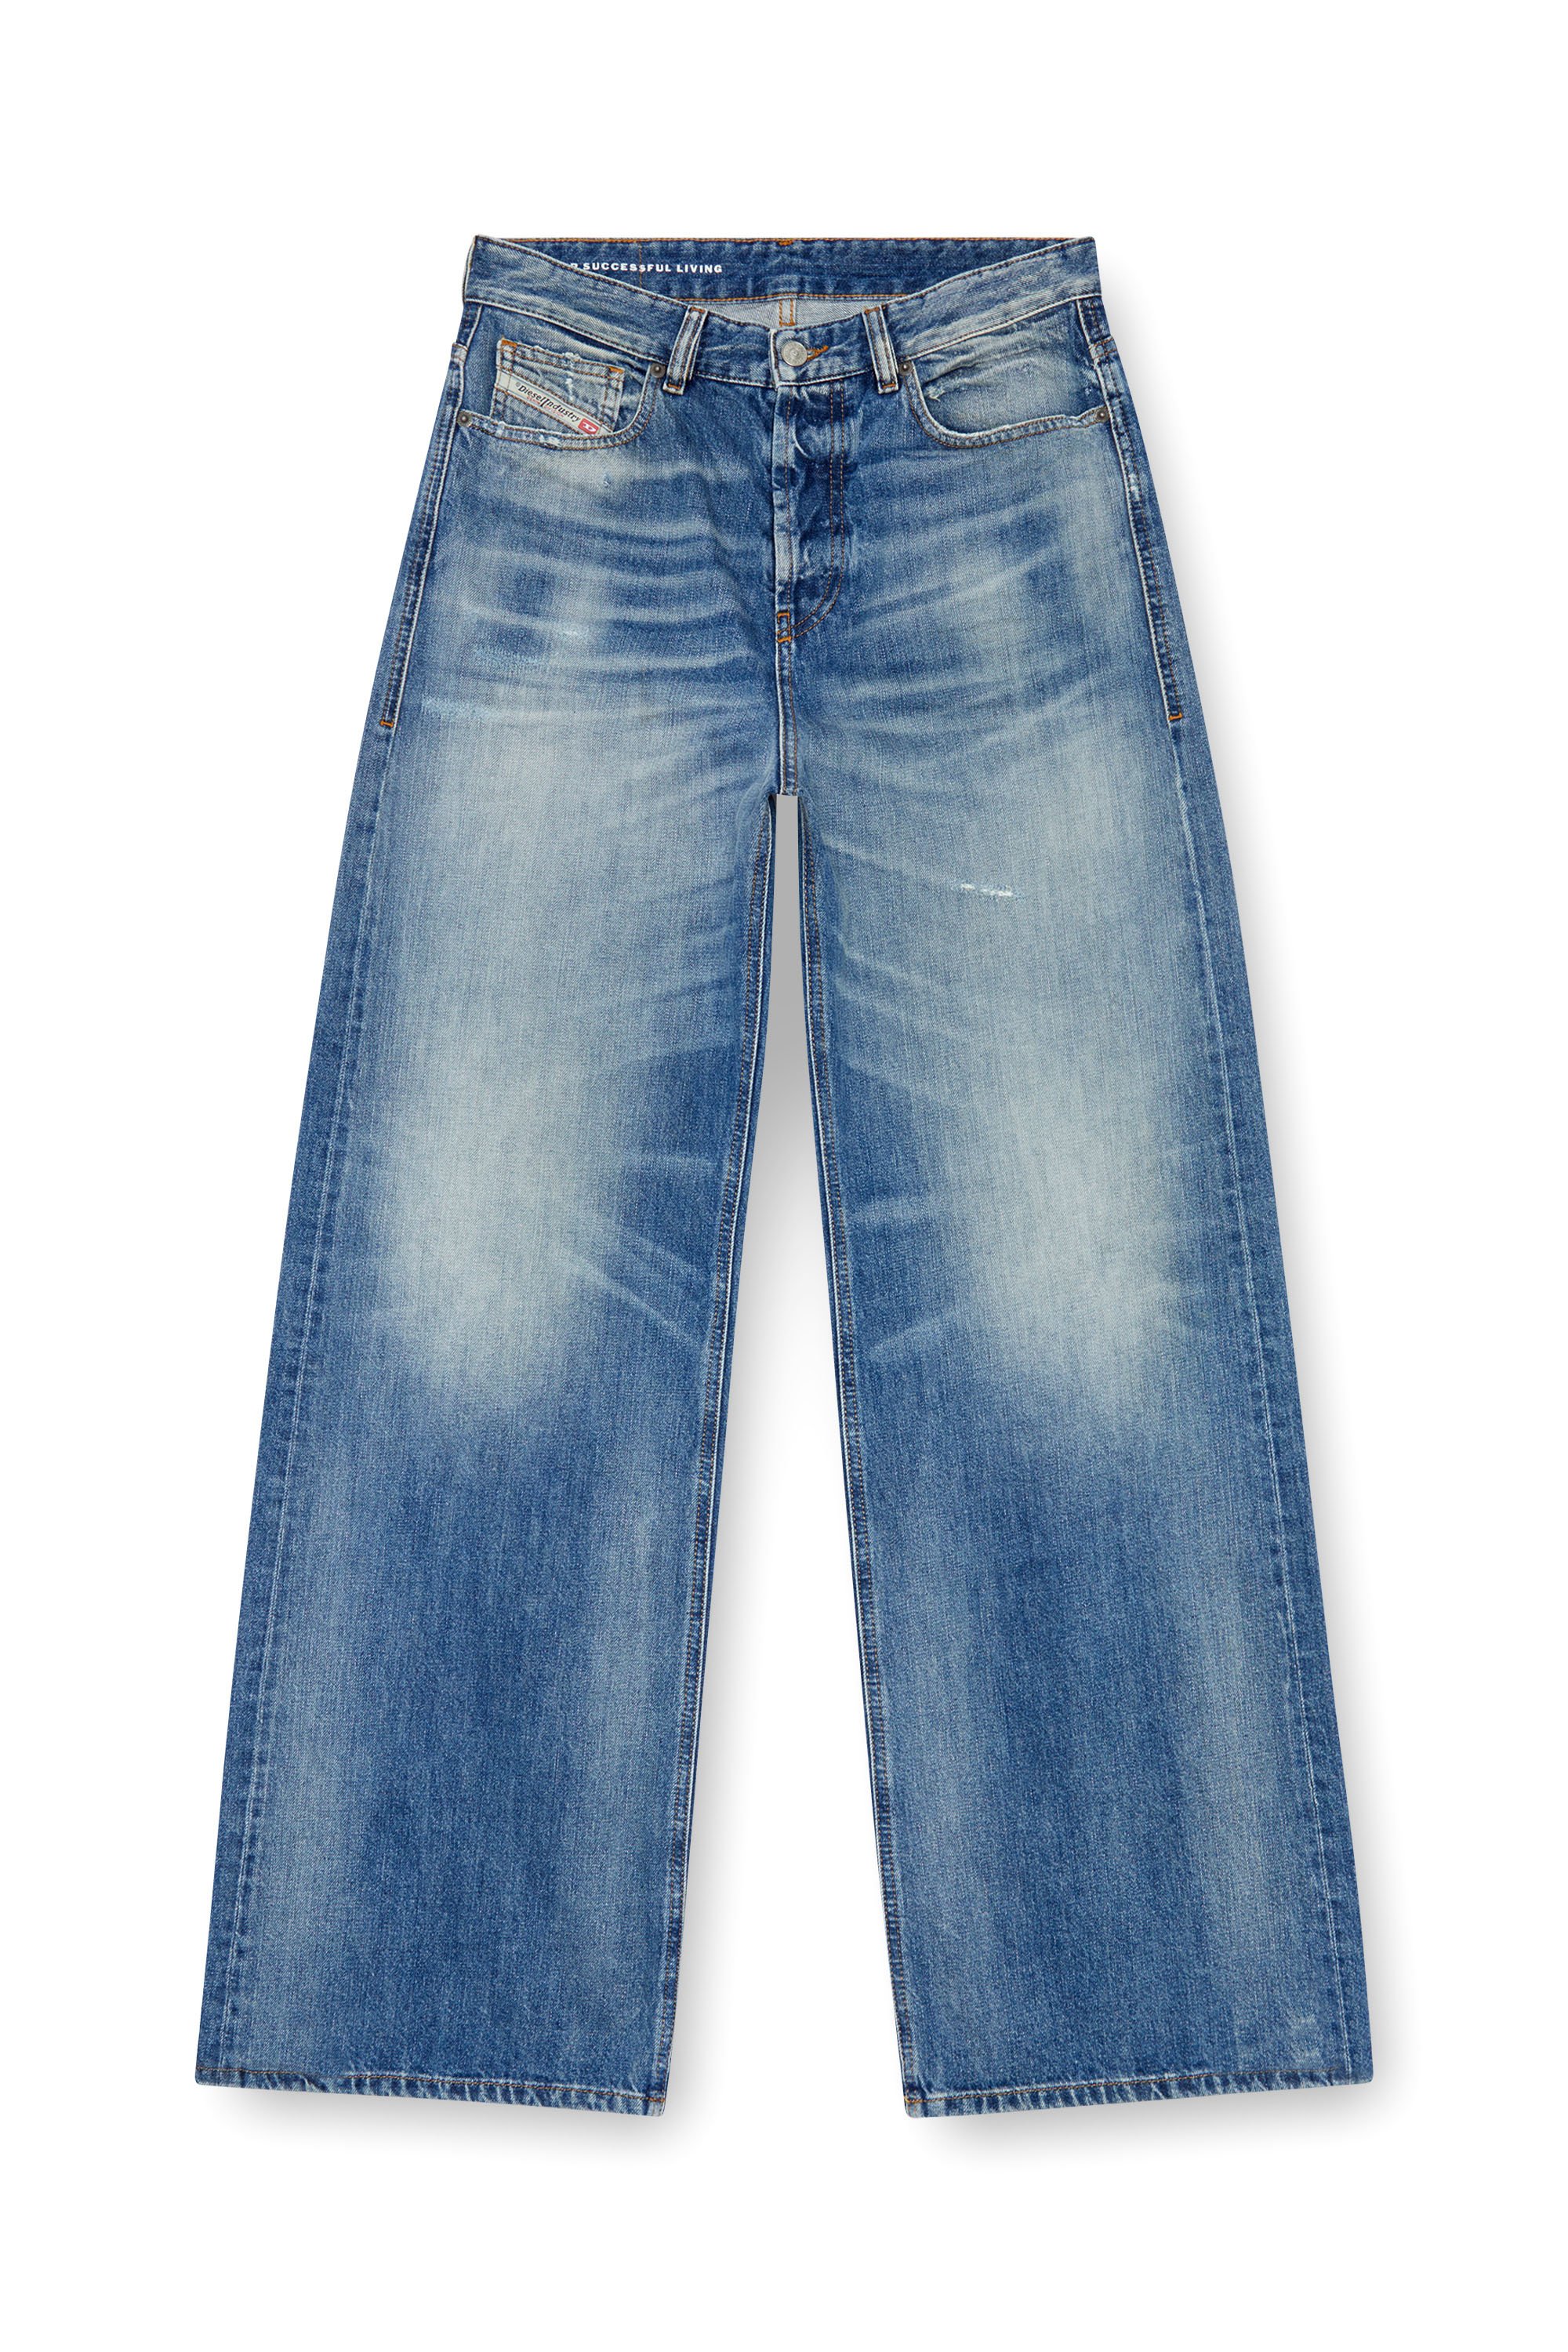 Diesel - Straight Jeans 1996 D-Sire 09J86, Mujer Straight Jeans - 1996 D-Sire in Azul marino - Image 5